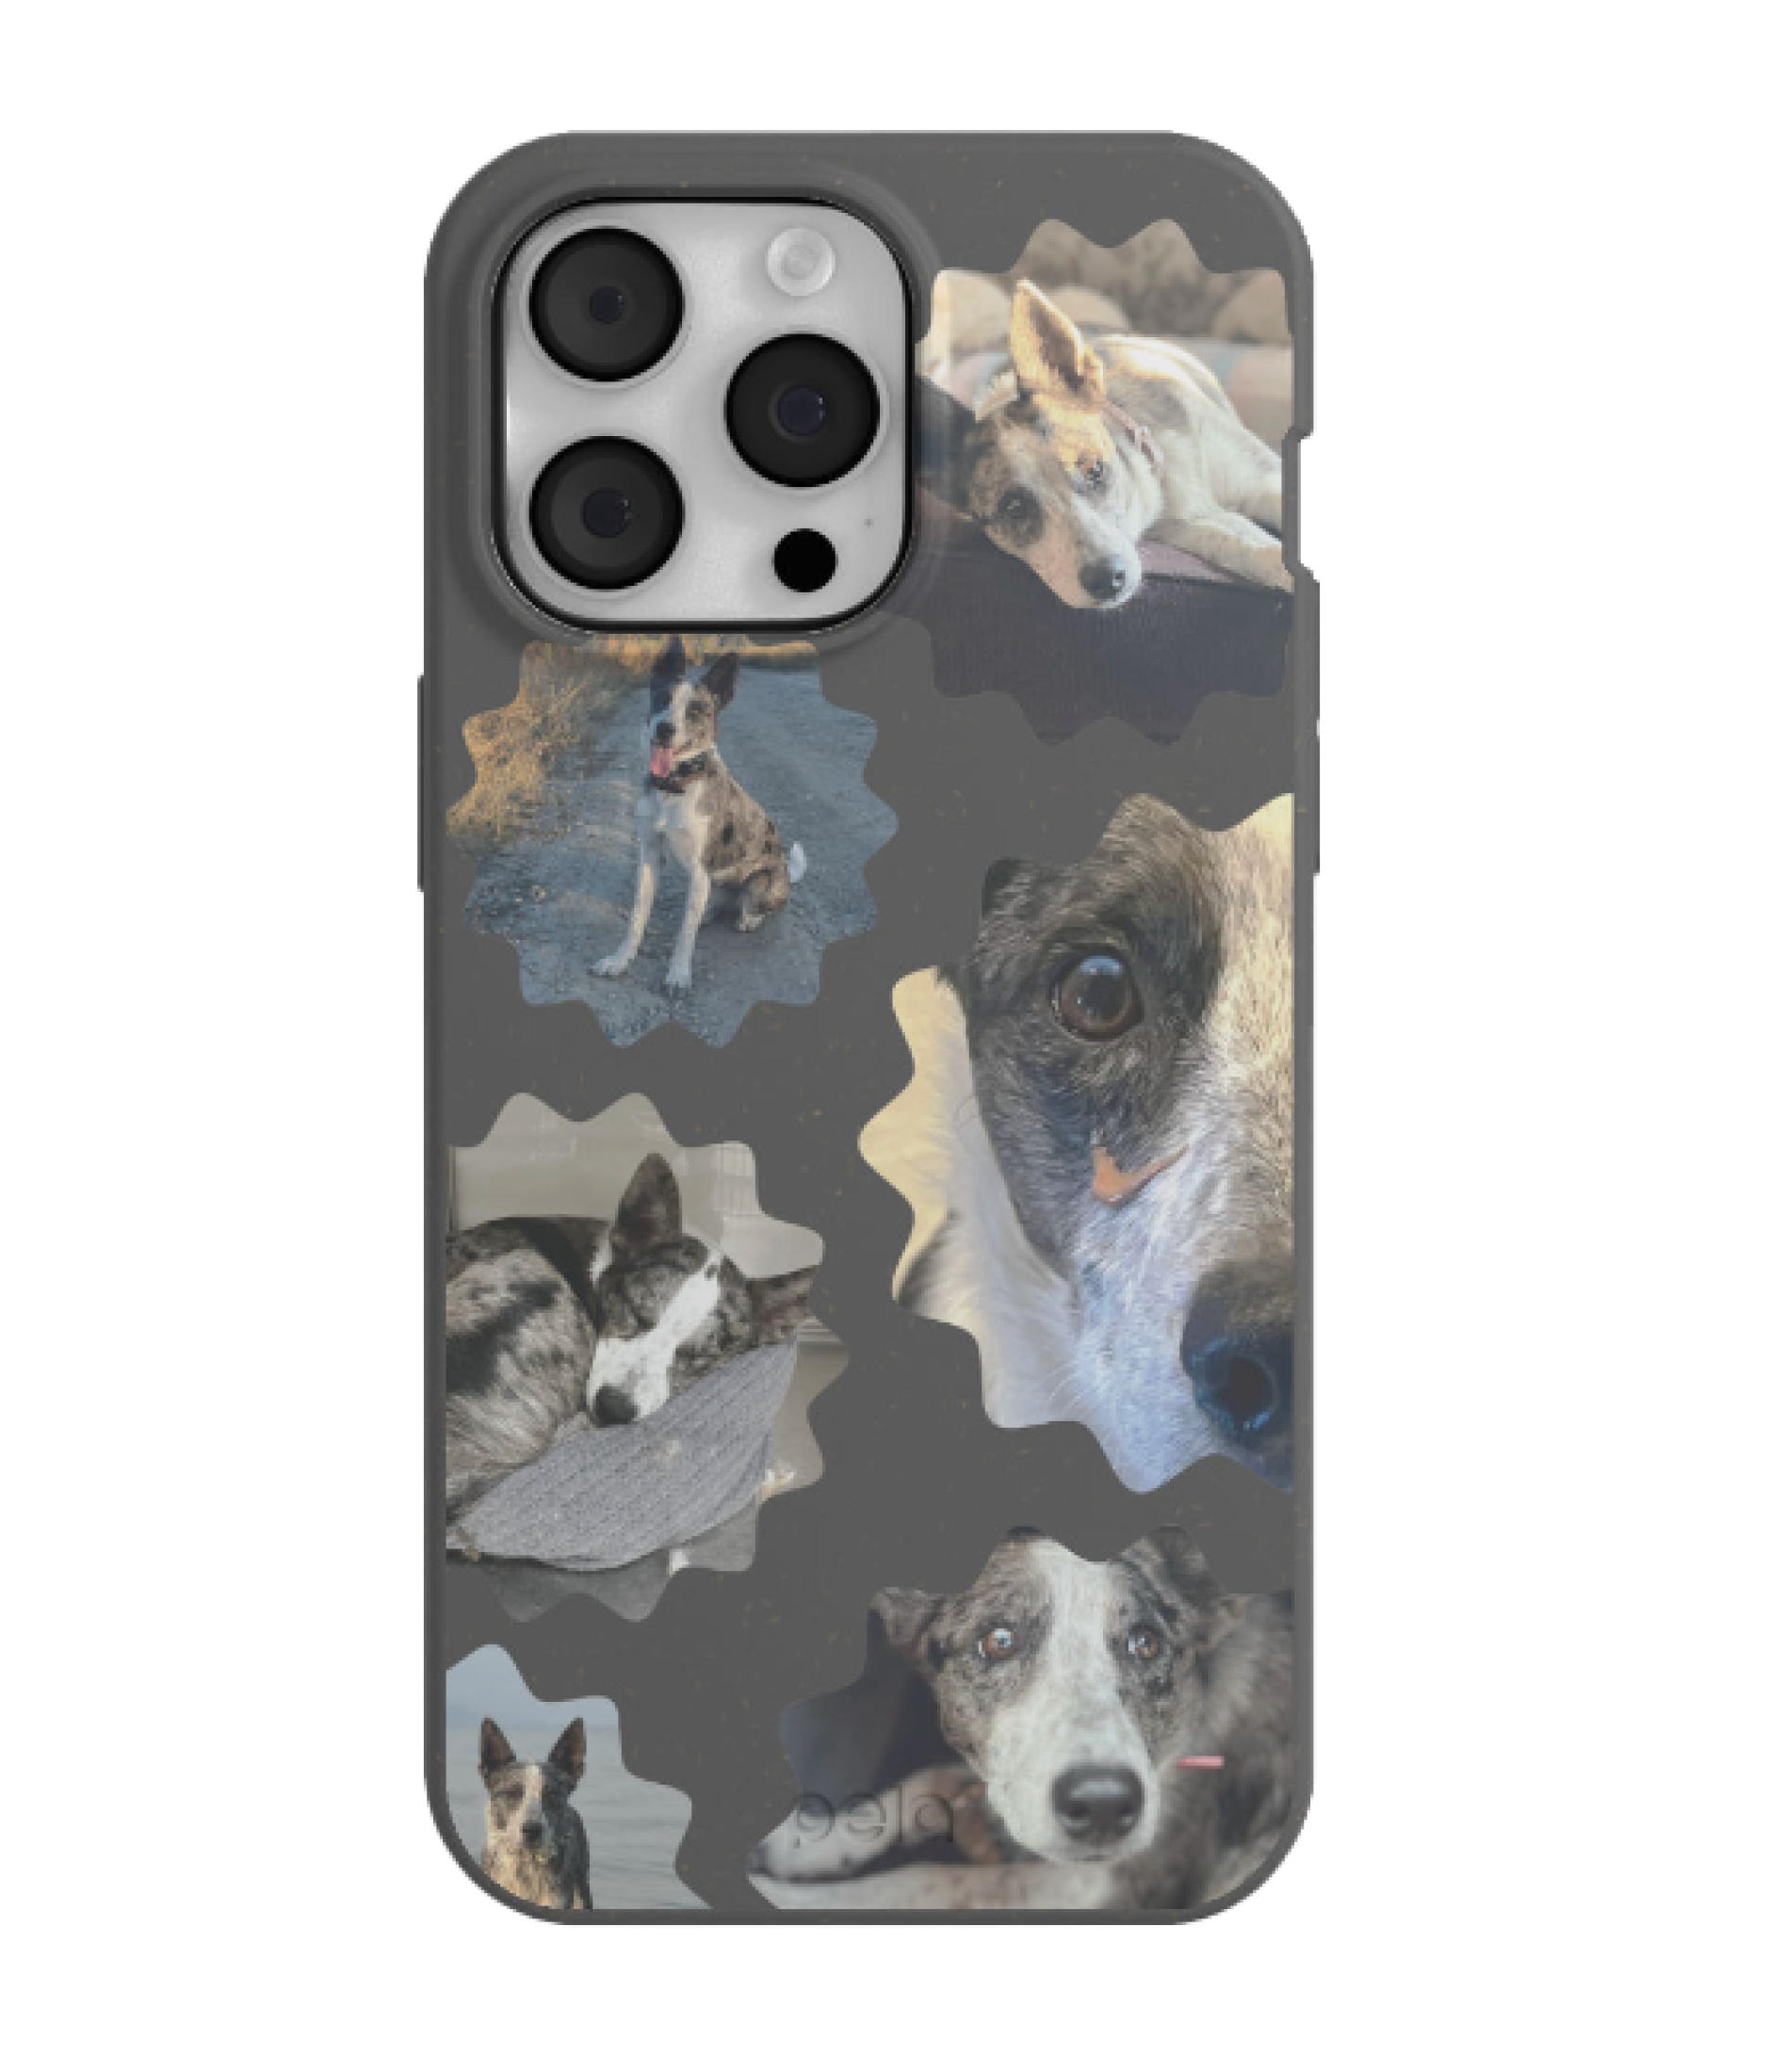 Custom phone case with a collage of various dogs.